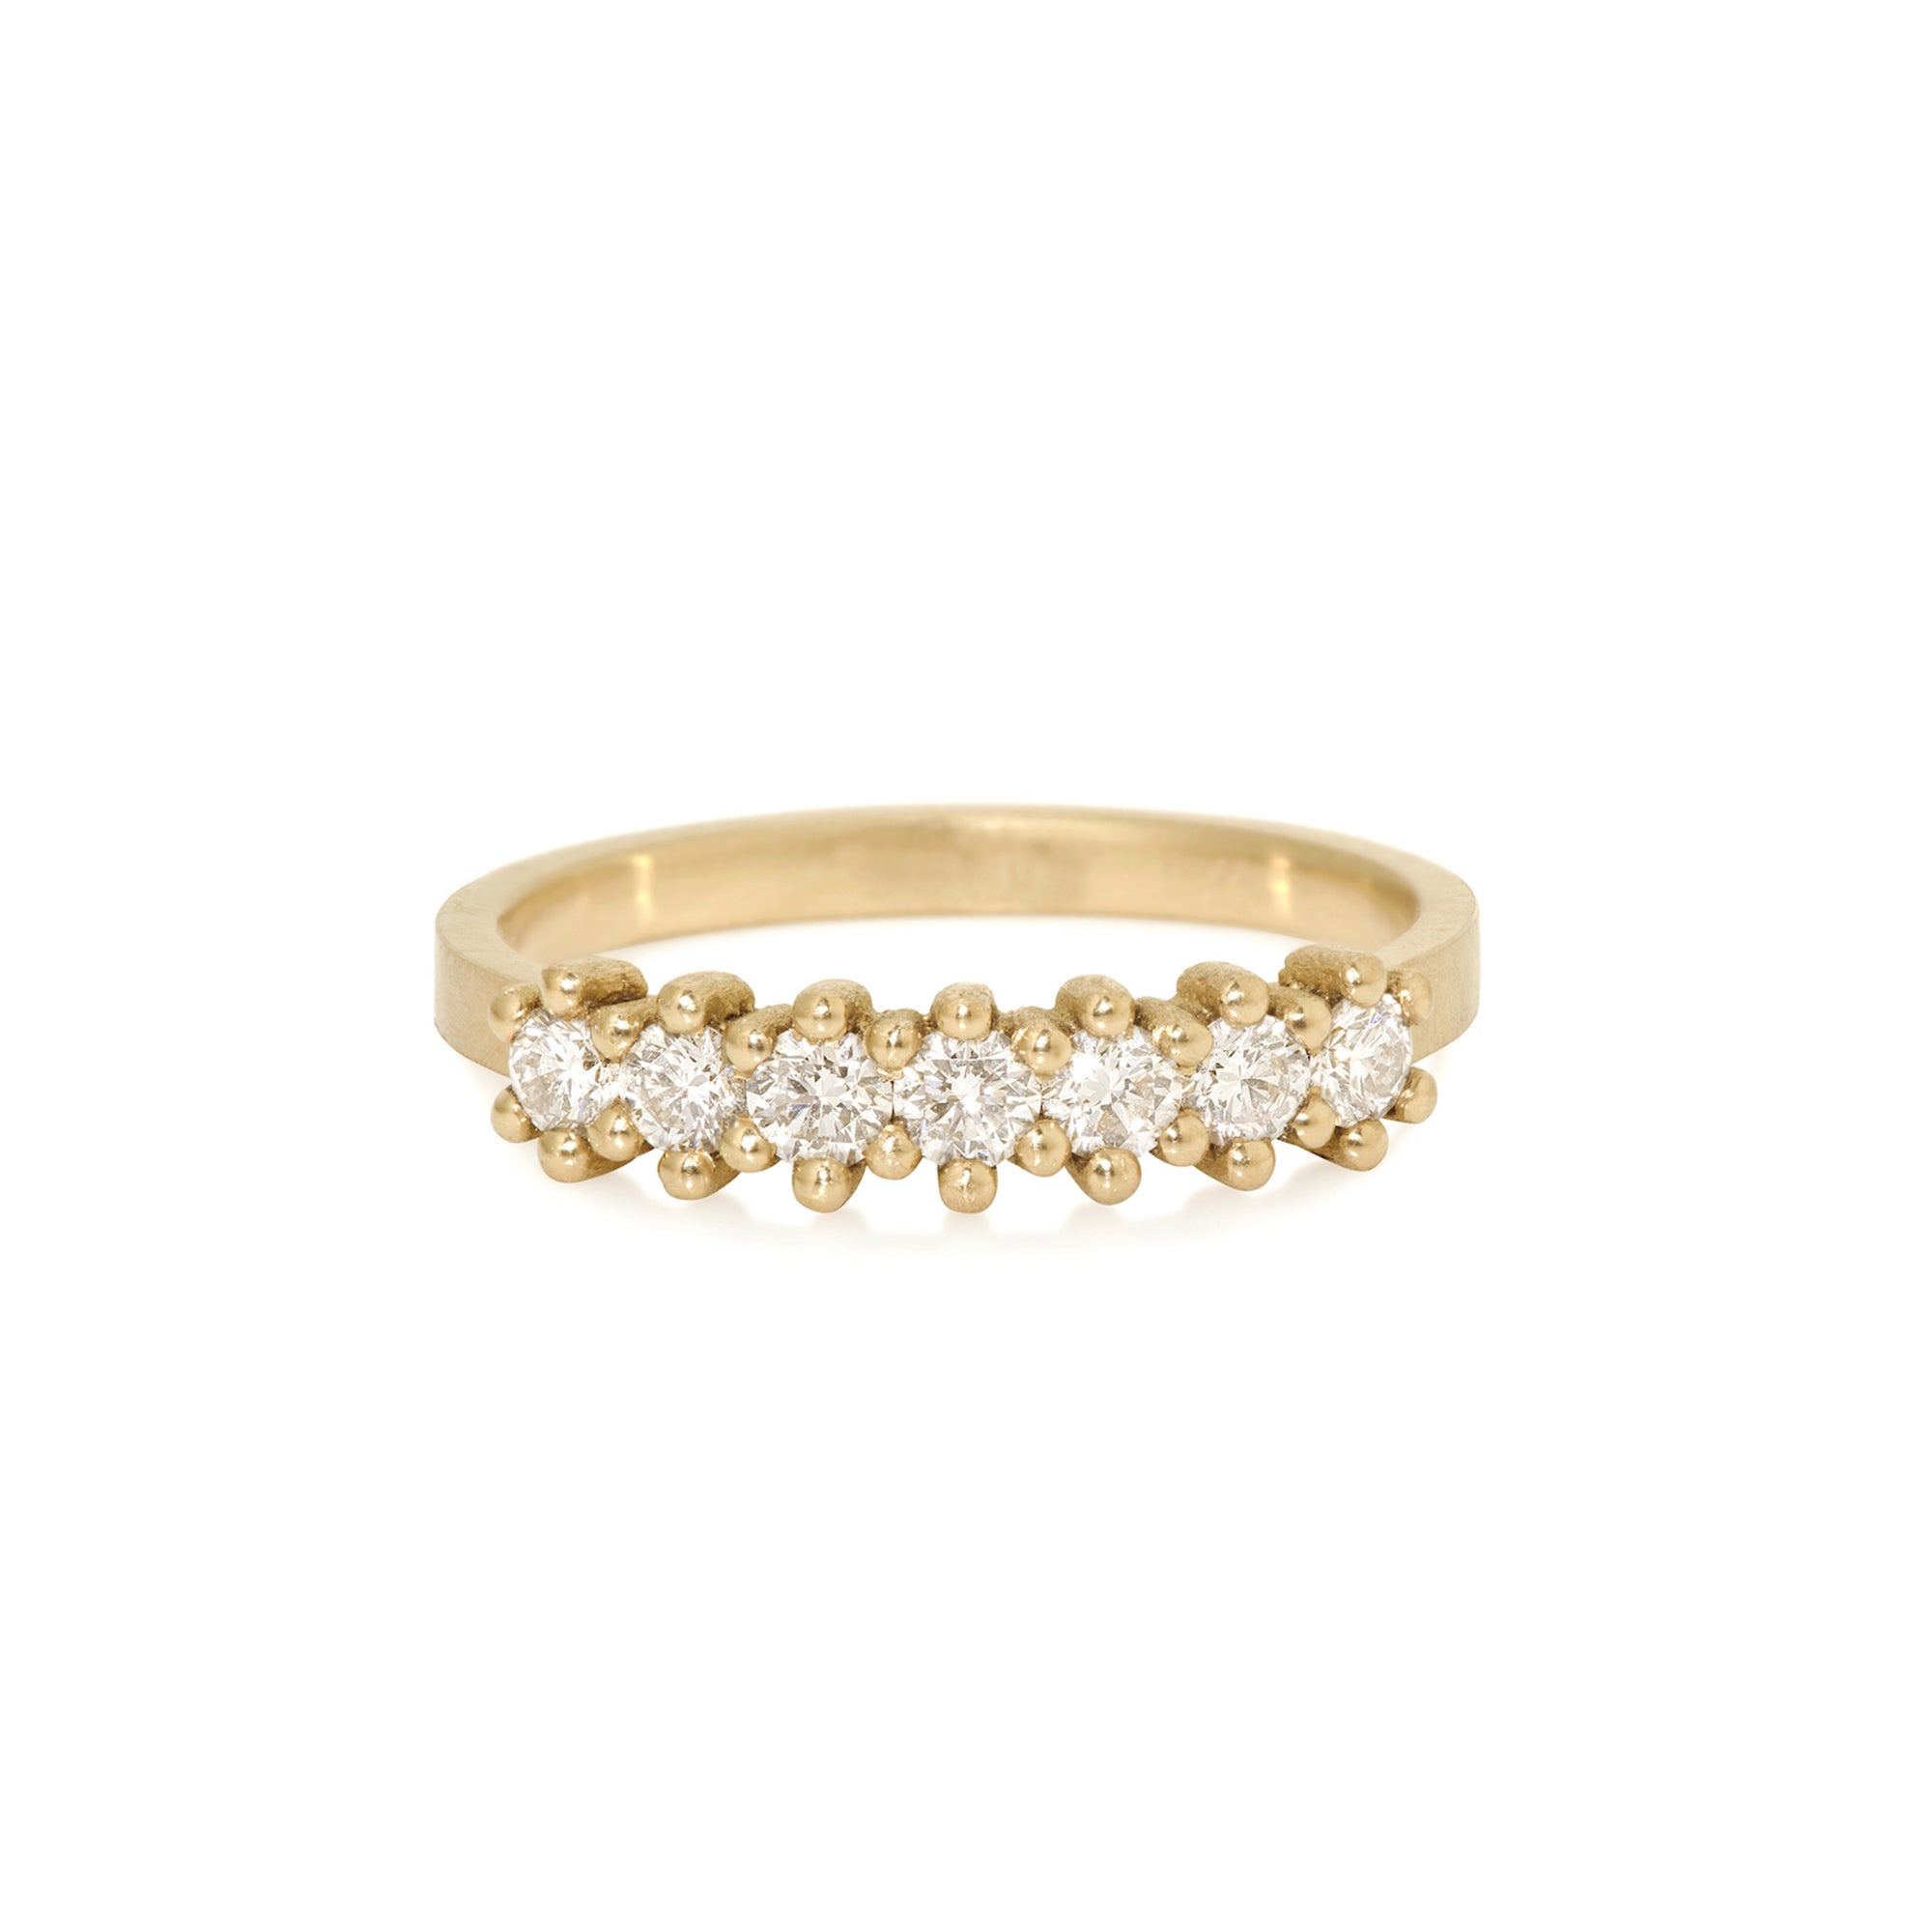    maya-selway-world-of-our-own-white-diamond-18ct-gold-half-eternity-ring